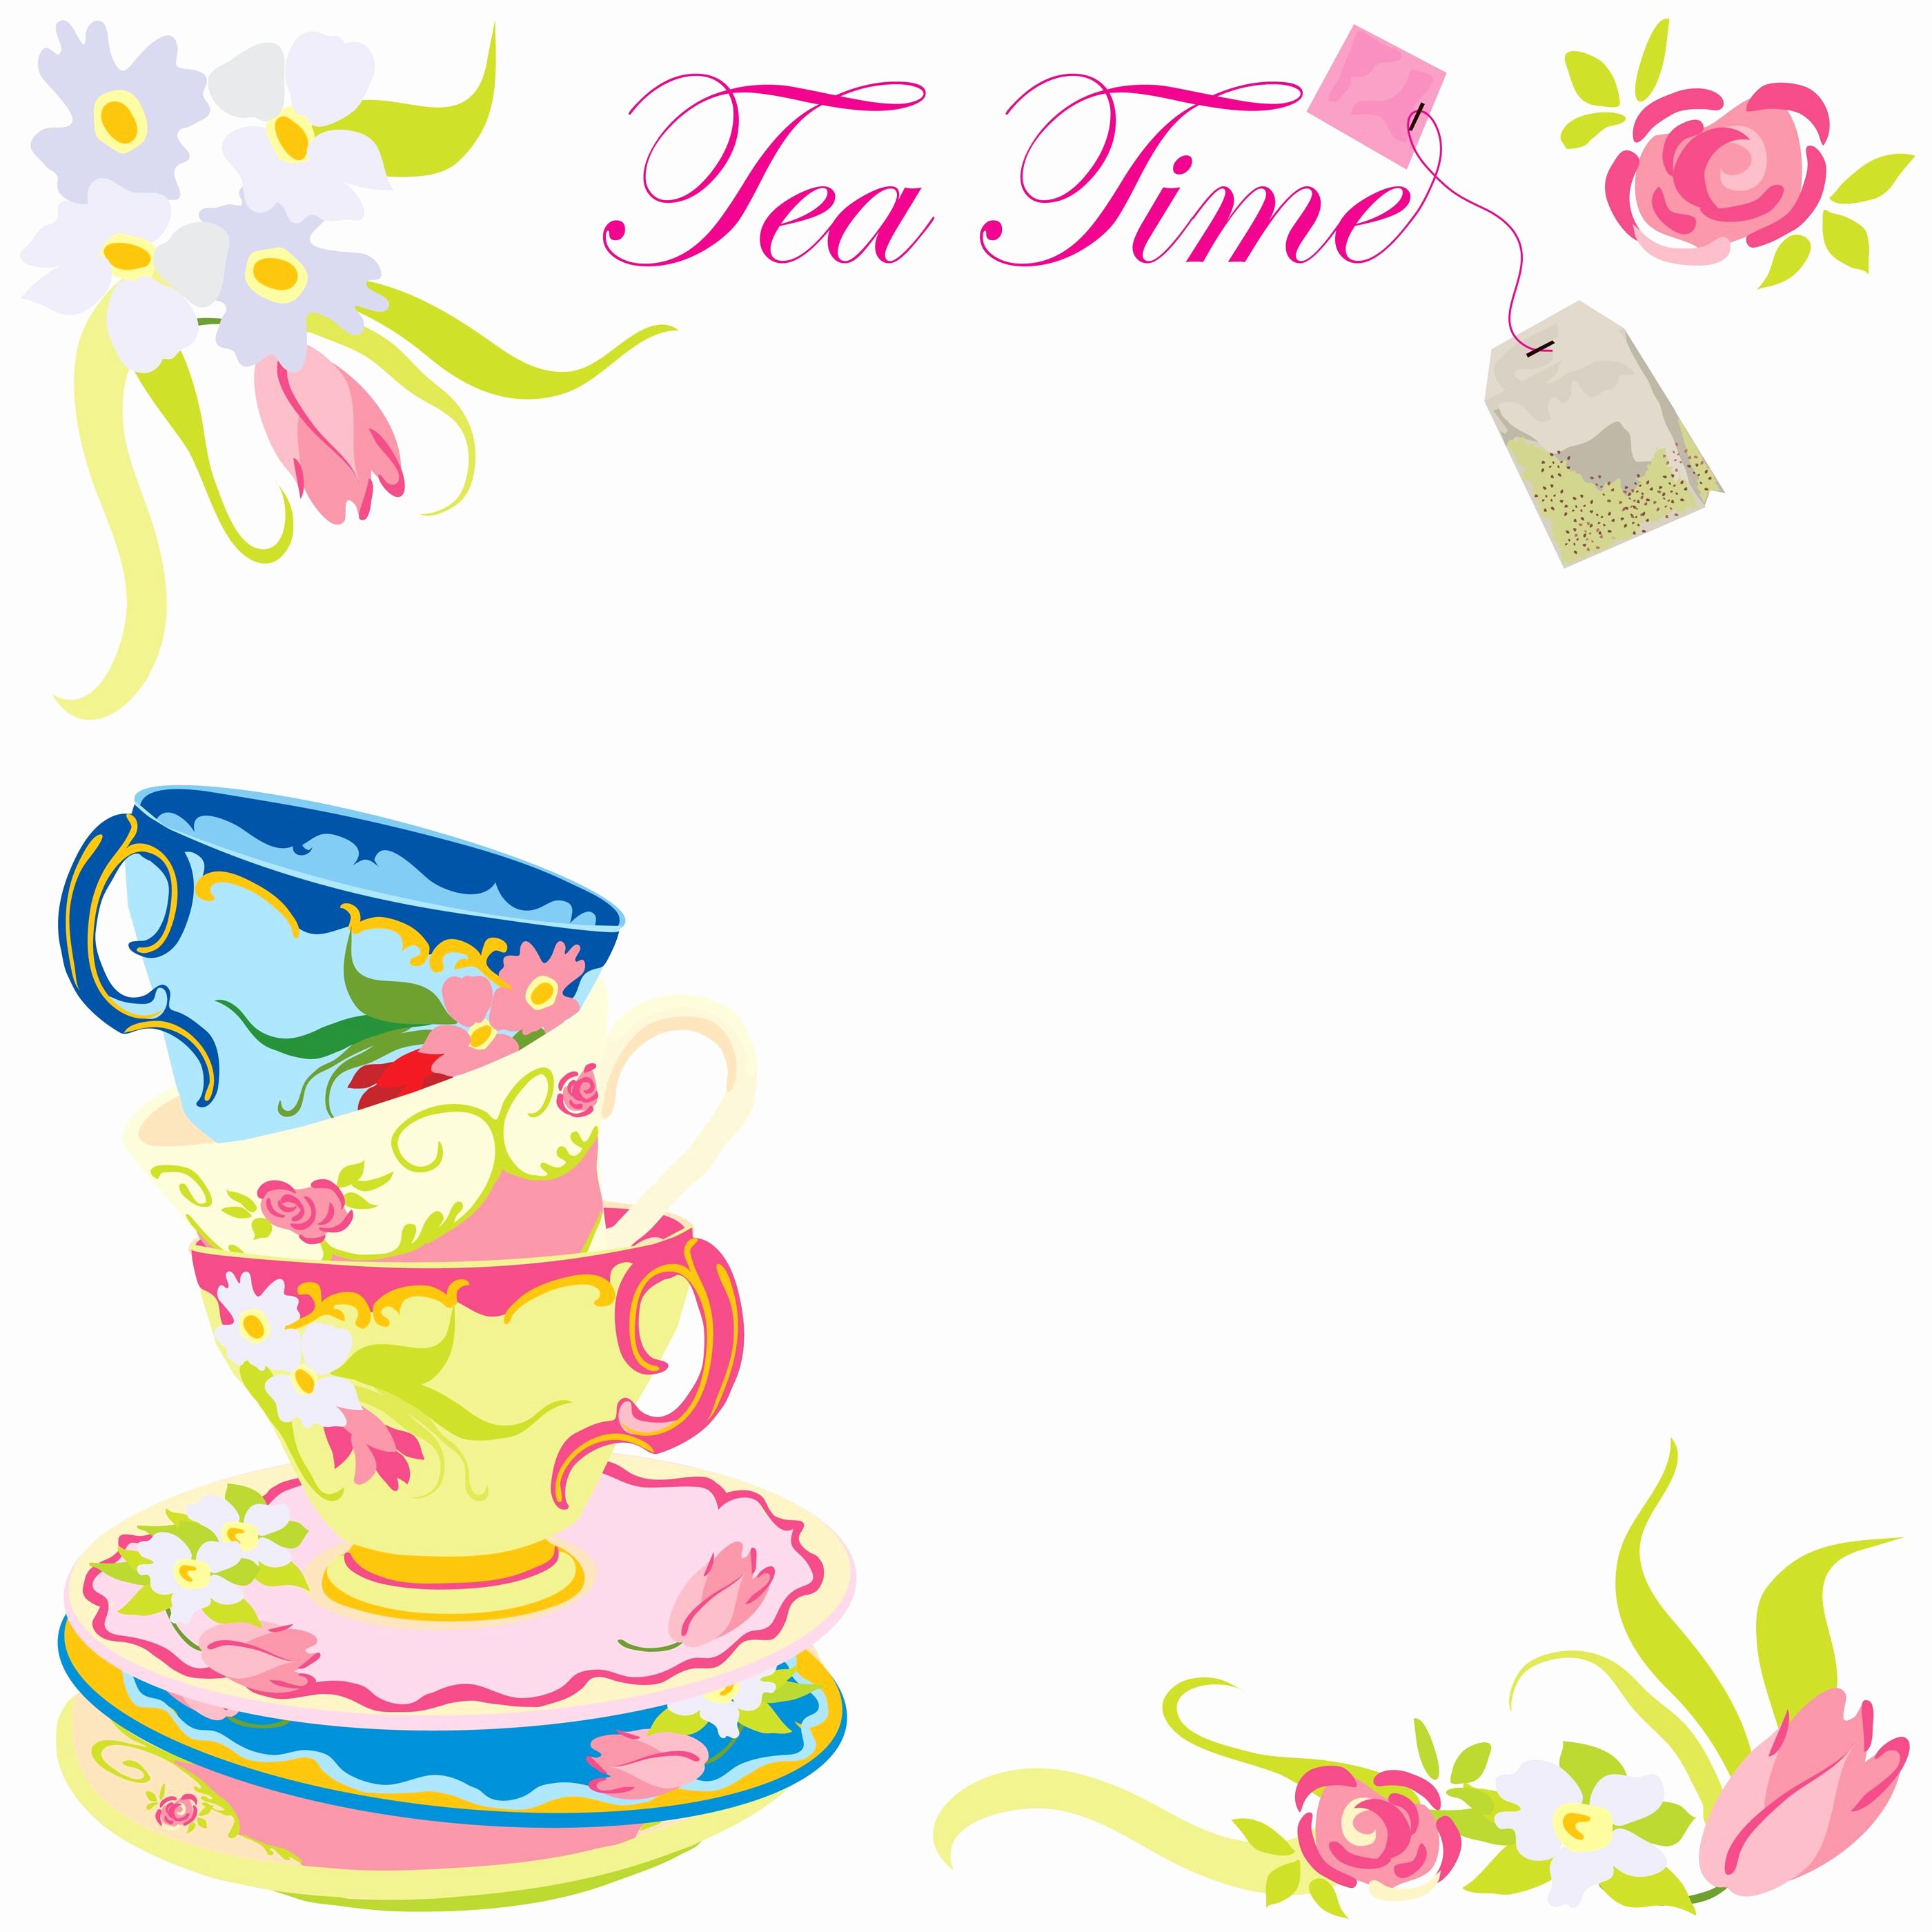 Tea Party Invitation Template Luxury Tea Cups for Tea Party Birthday theme Description From Pinterest I Searched for This On